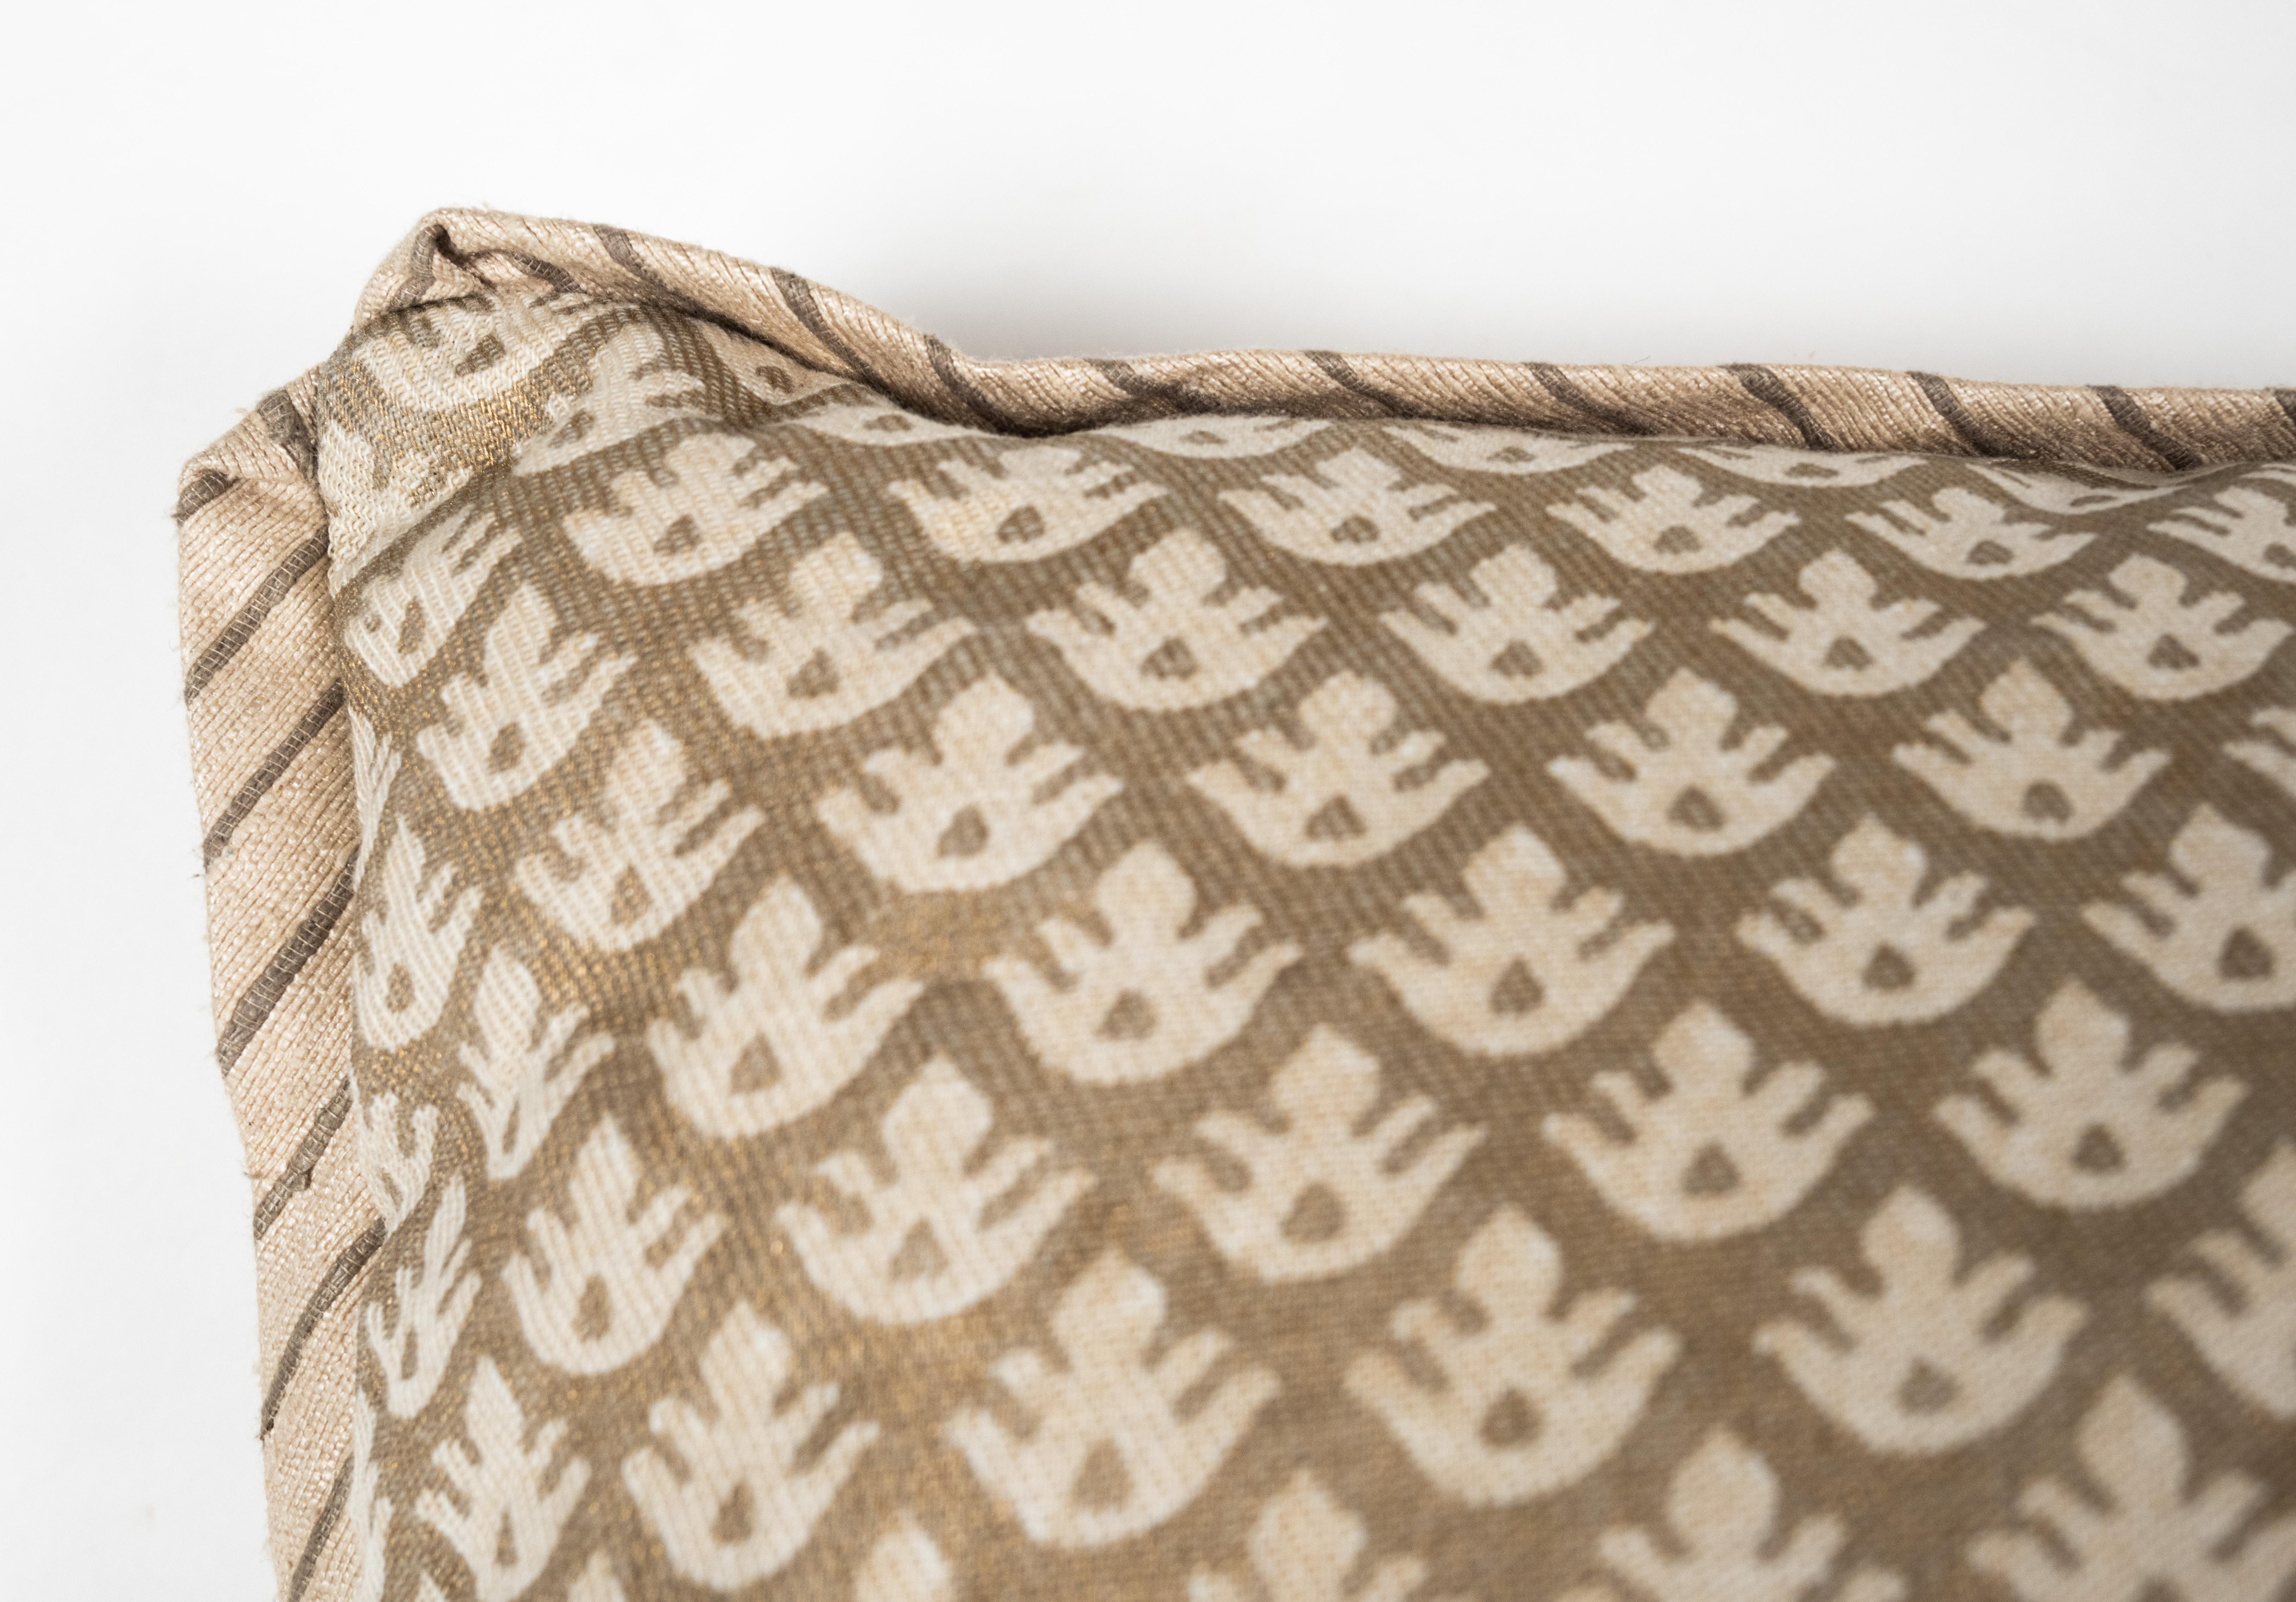 A single Fortuny cushion in the Canestrelli pattern with an ivory and silvery-gold color way and a geometric shell pattern.